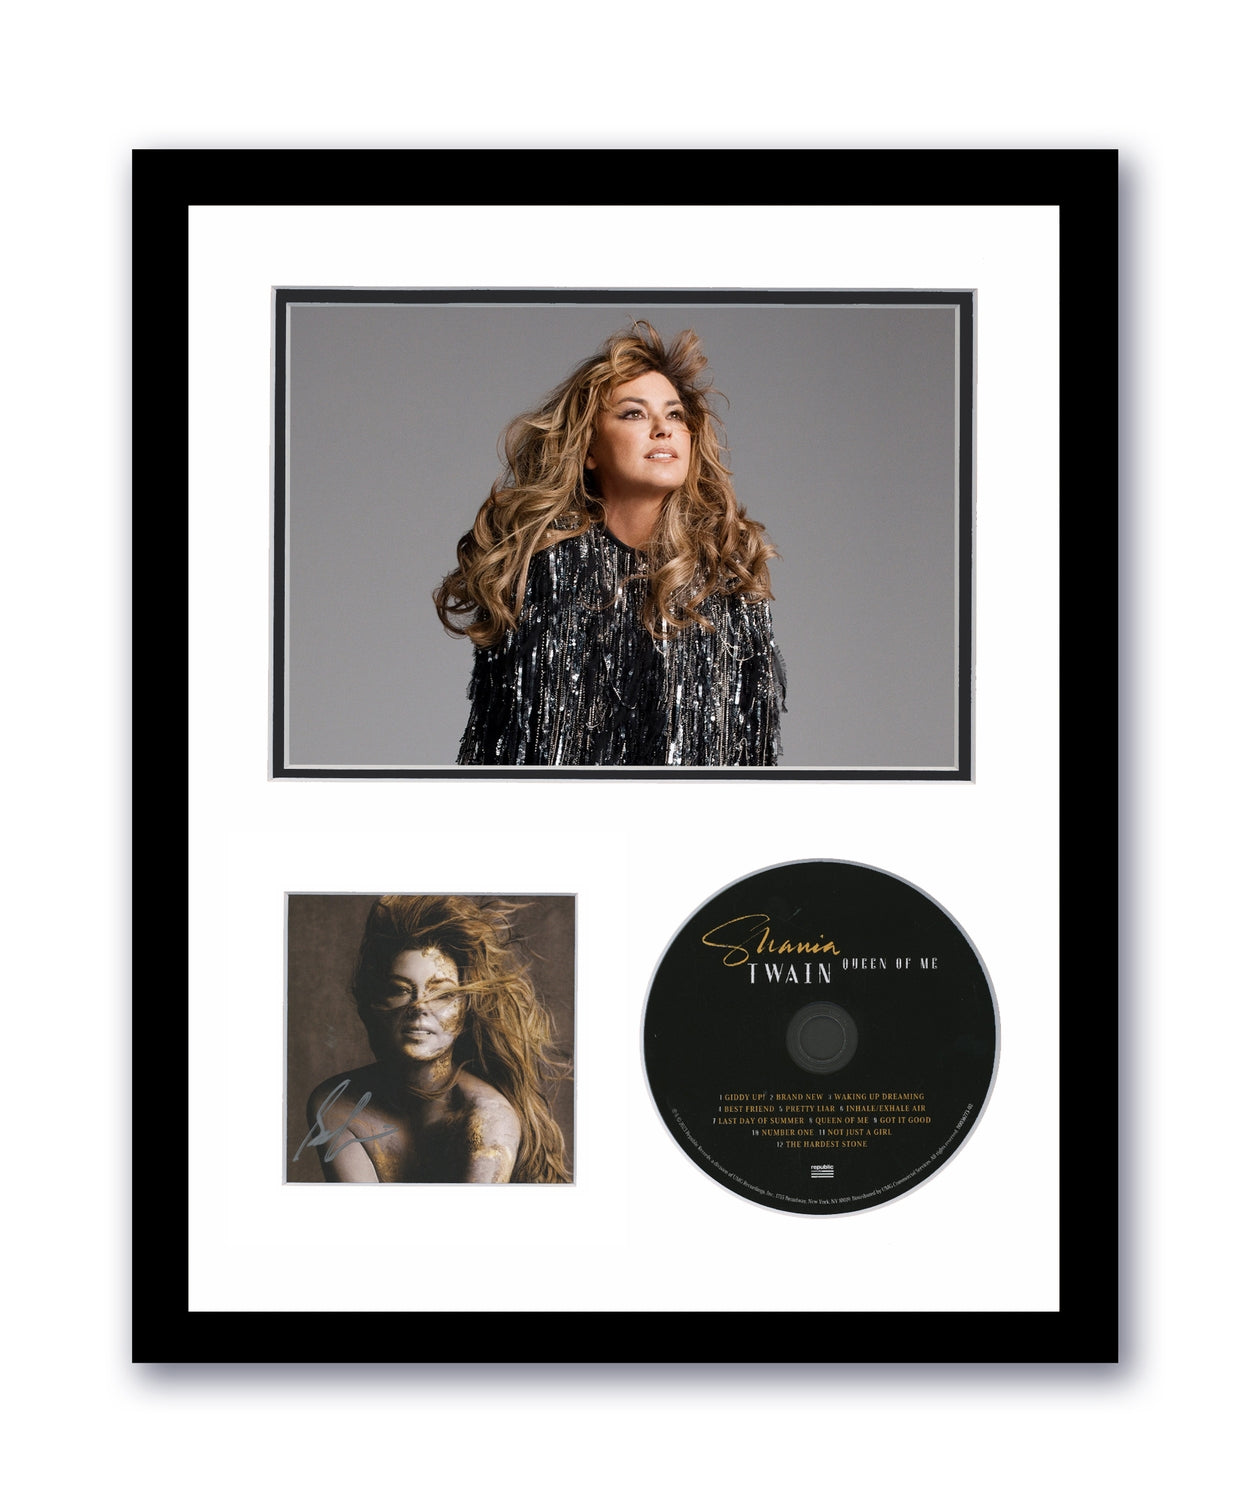 Shania Twain Autographed Signed 11x14 Custom Framed CD Queen of Me Country ACOA